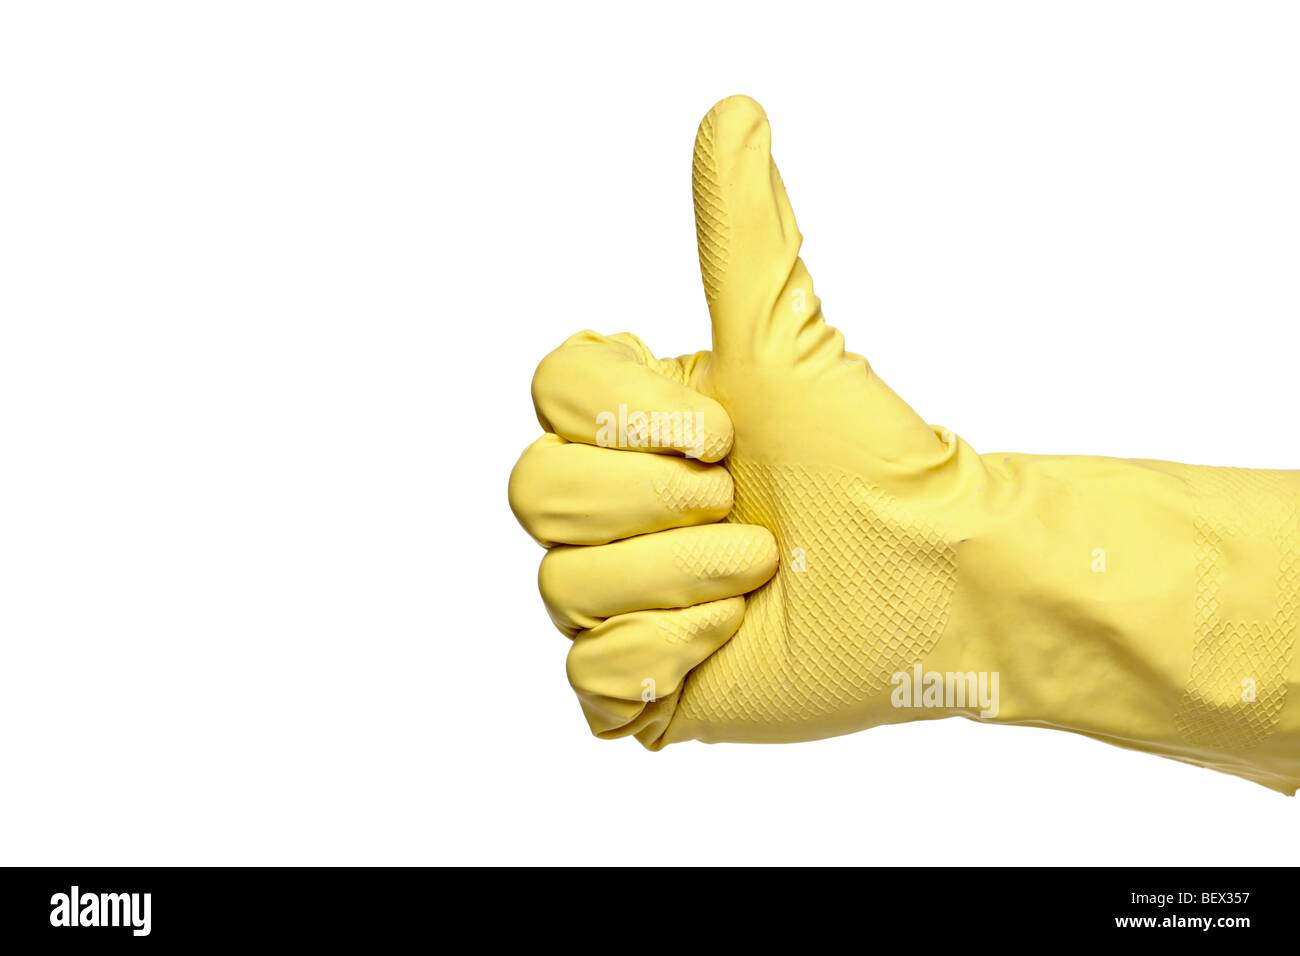 Thumbs-up with a yellow rubber glove isolated on a white background Stock Photo